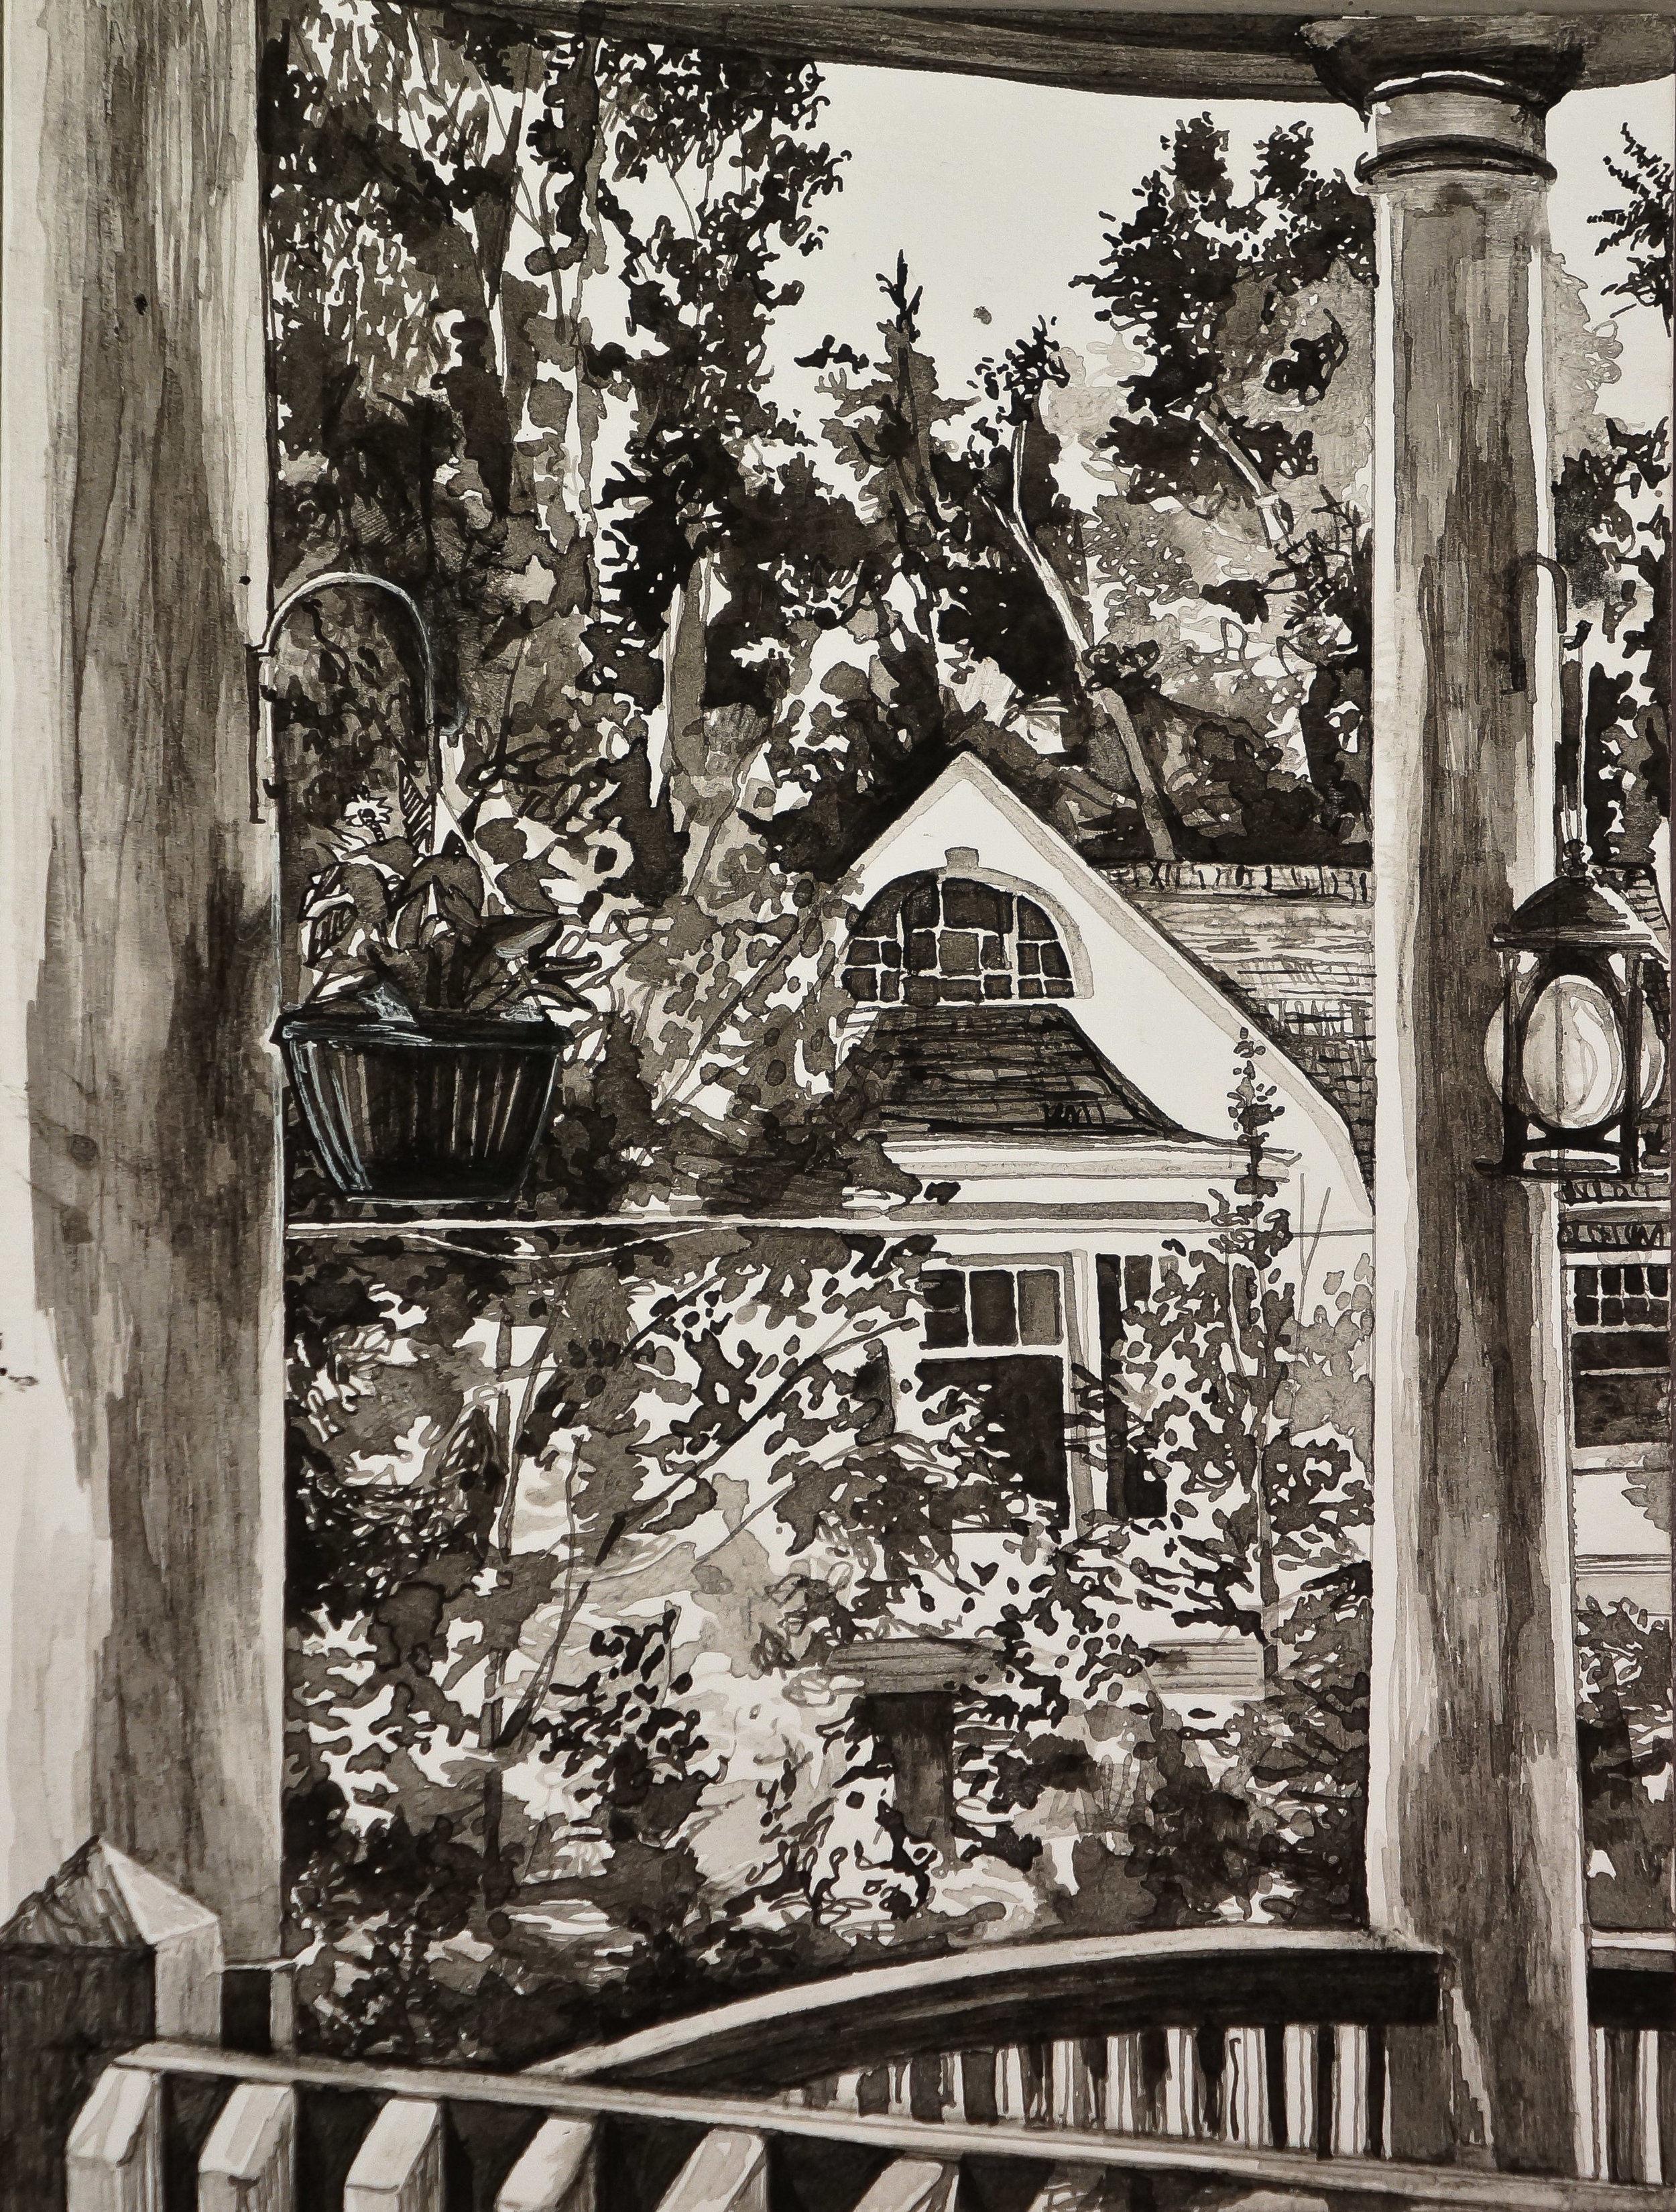  From the Porch, ink on paper, 2015 